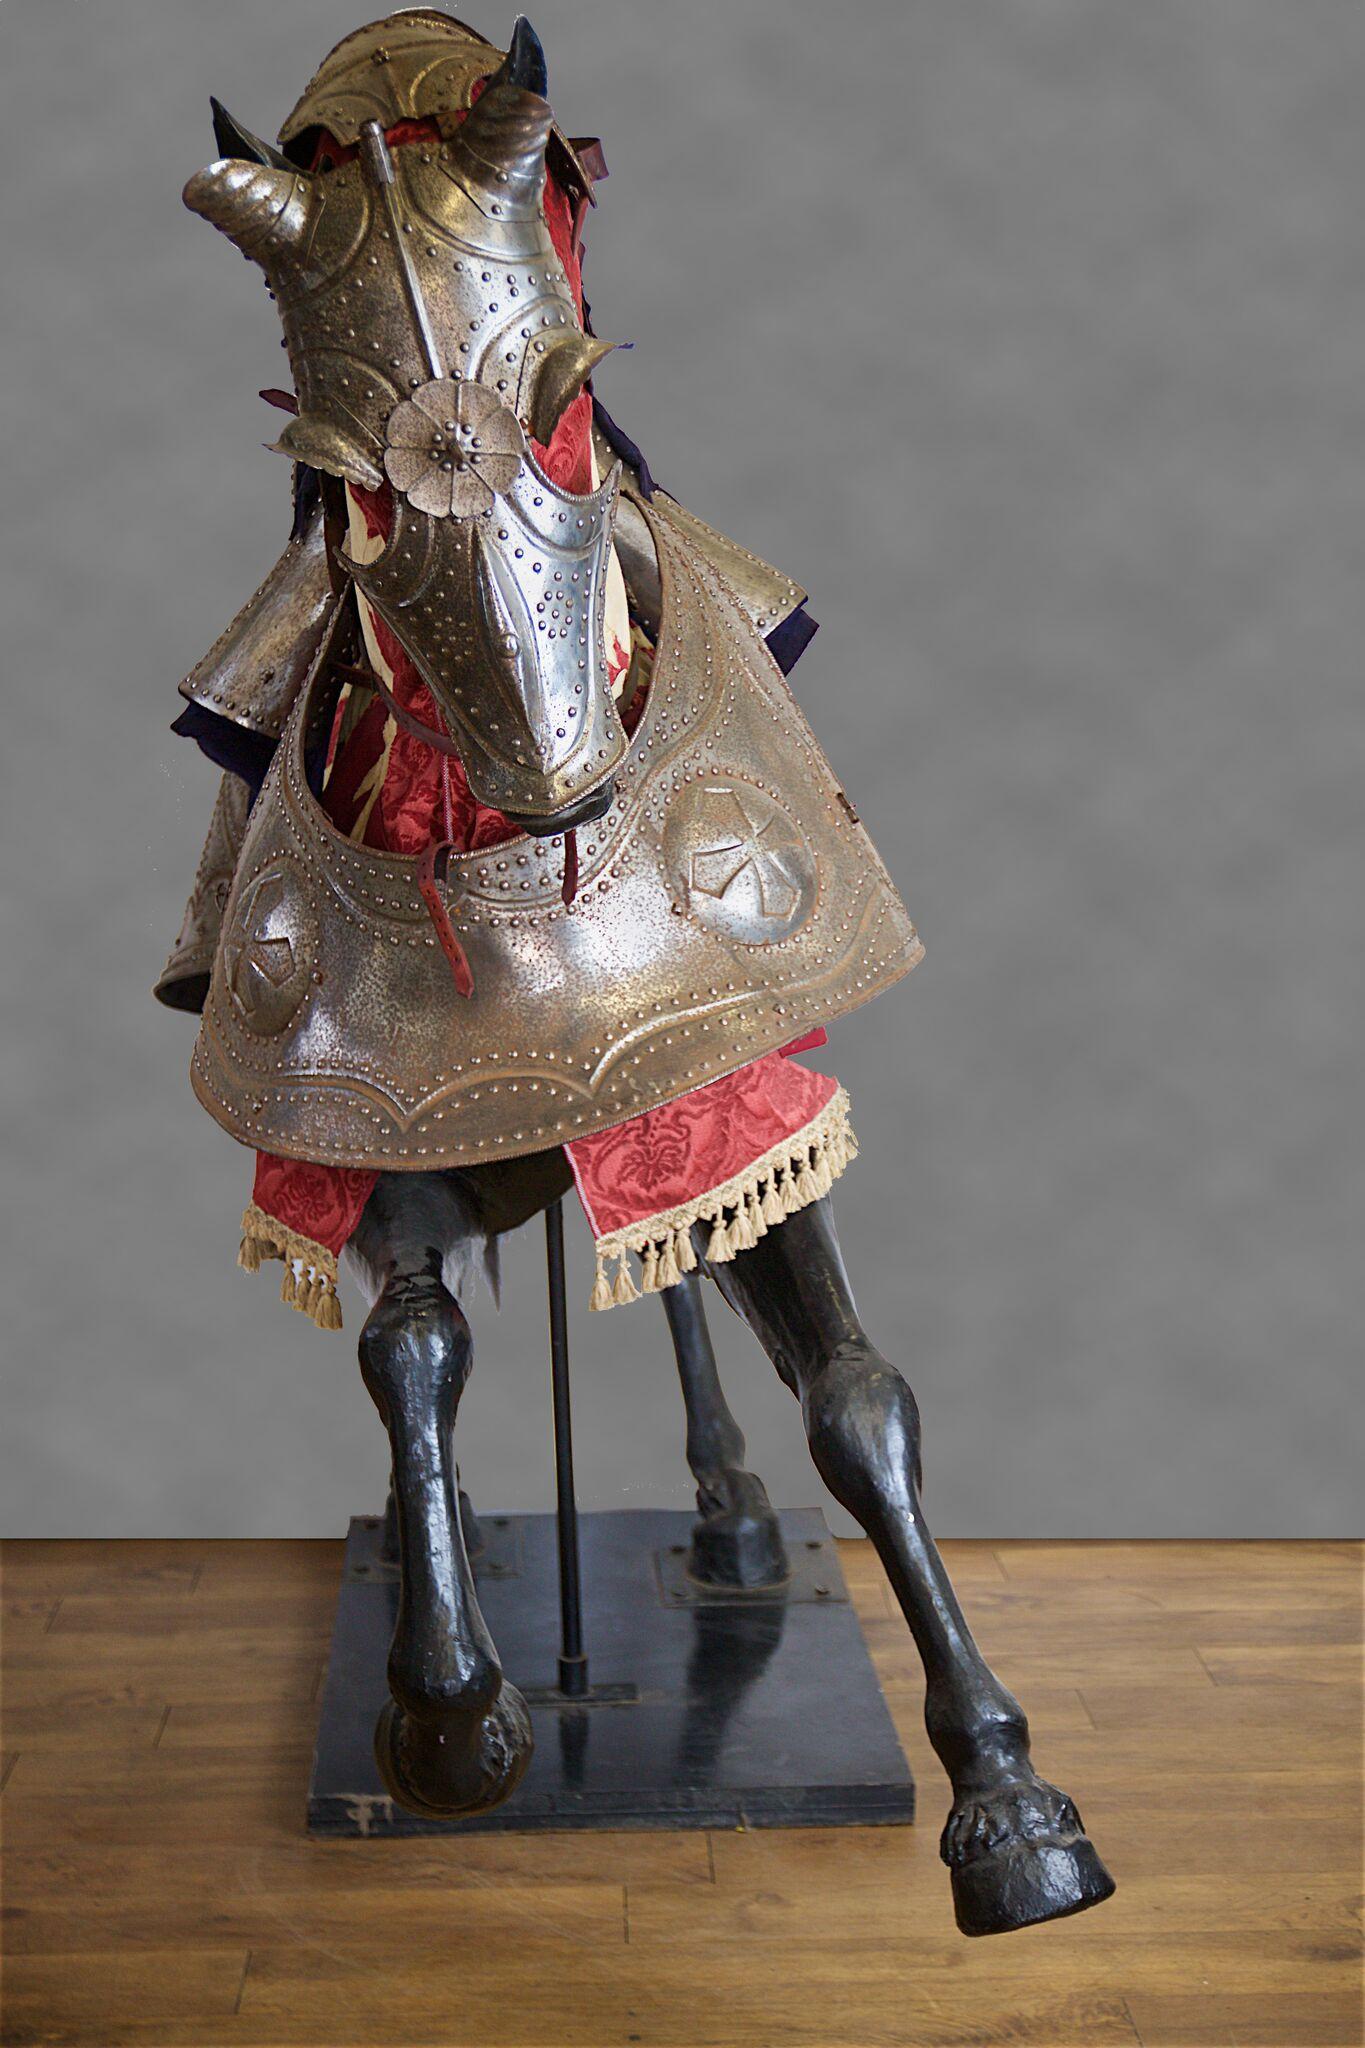 armor for man and horse